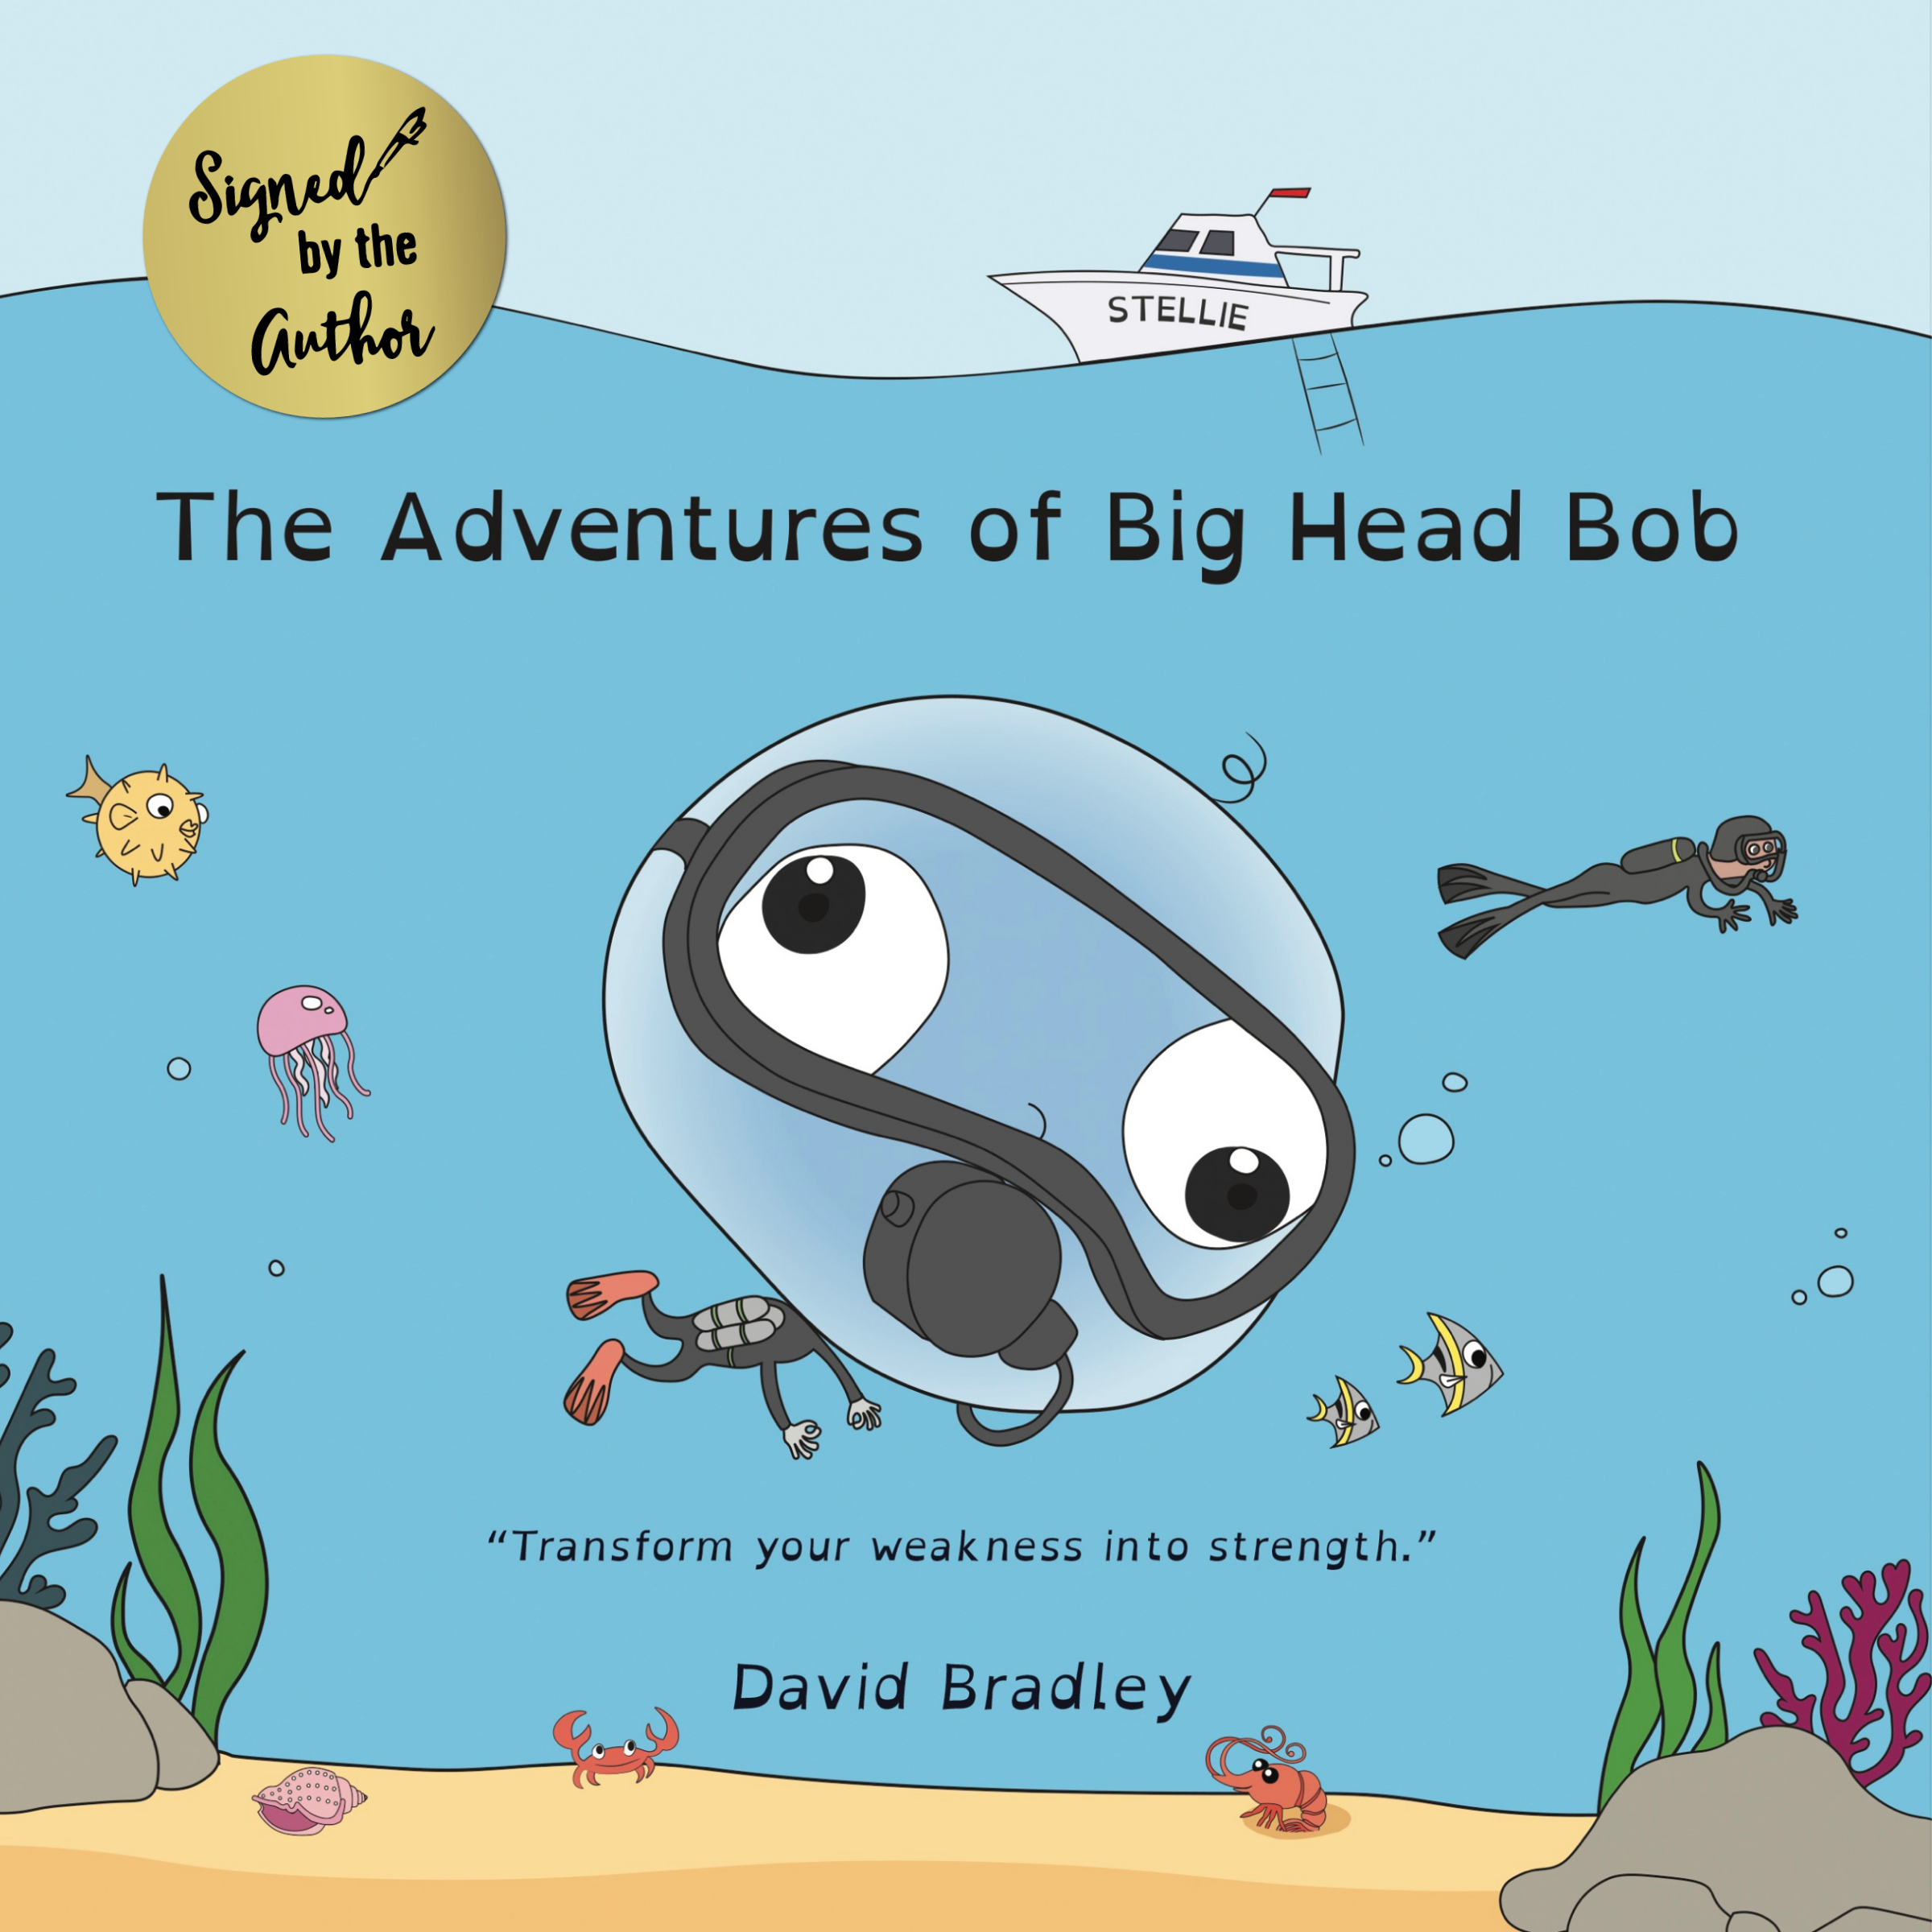 Book 1 - Signed Copy of The Adventures of Big Head Bob - Transform Your Weakness into Strength